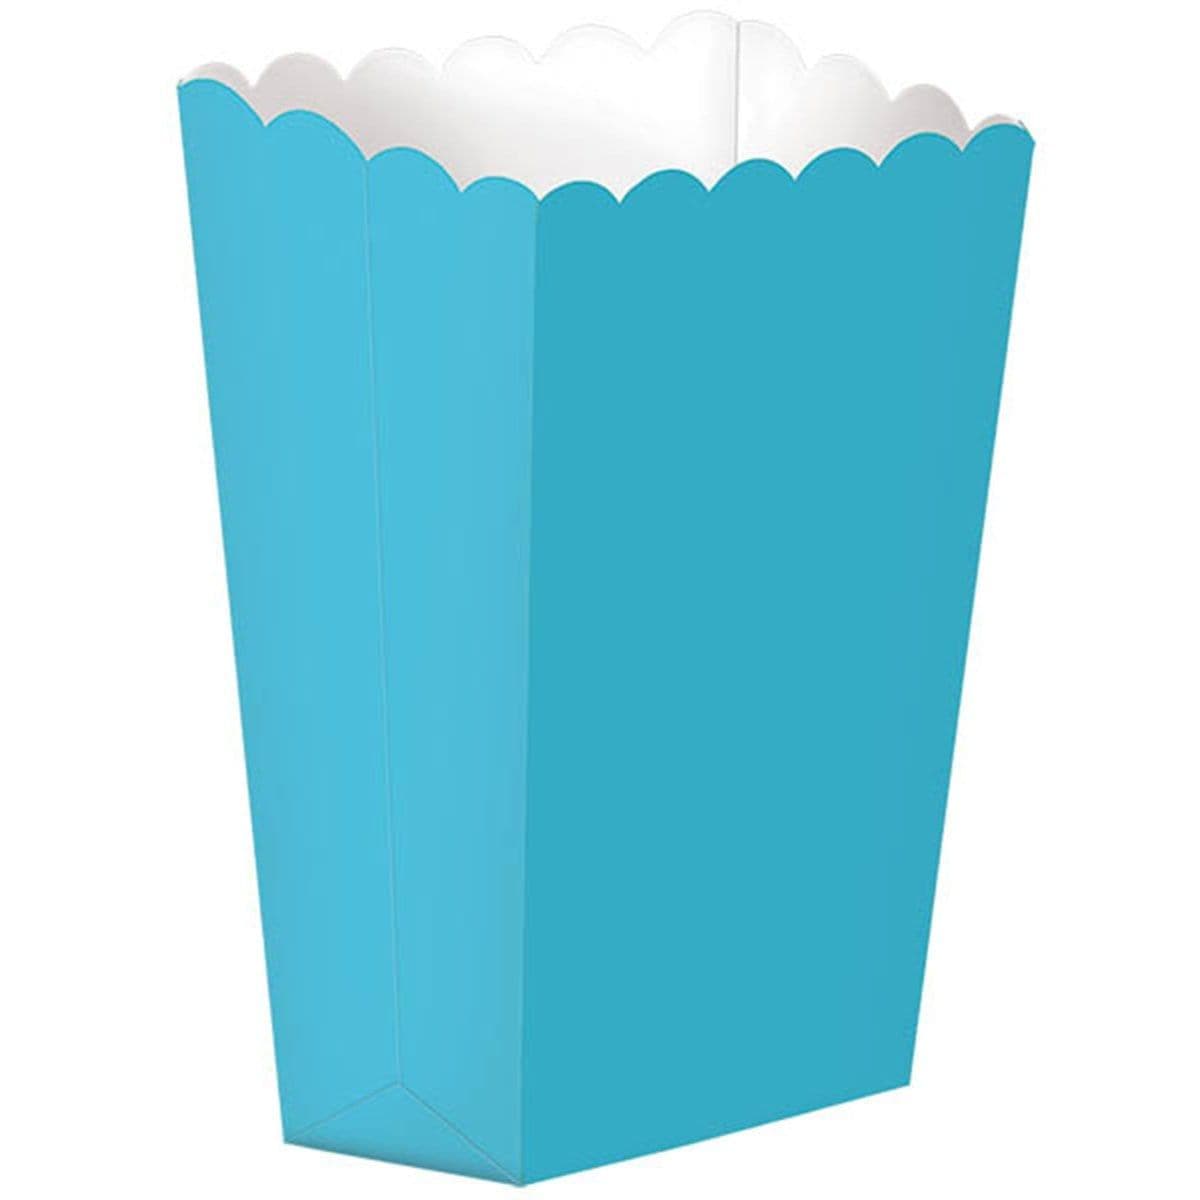 Buy Party Supplies Popcorn Box - Caribbean Blue 5/pkg sold at Party Expert